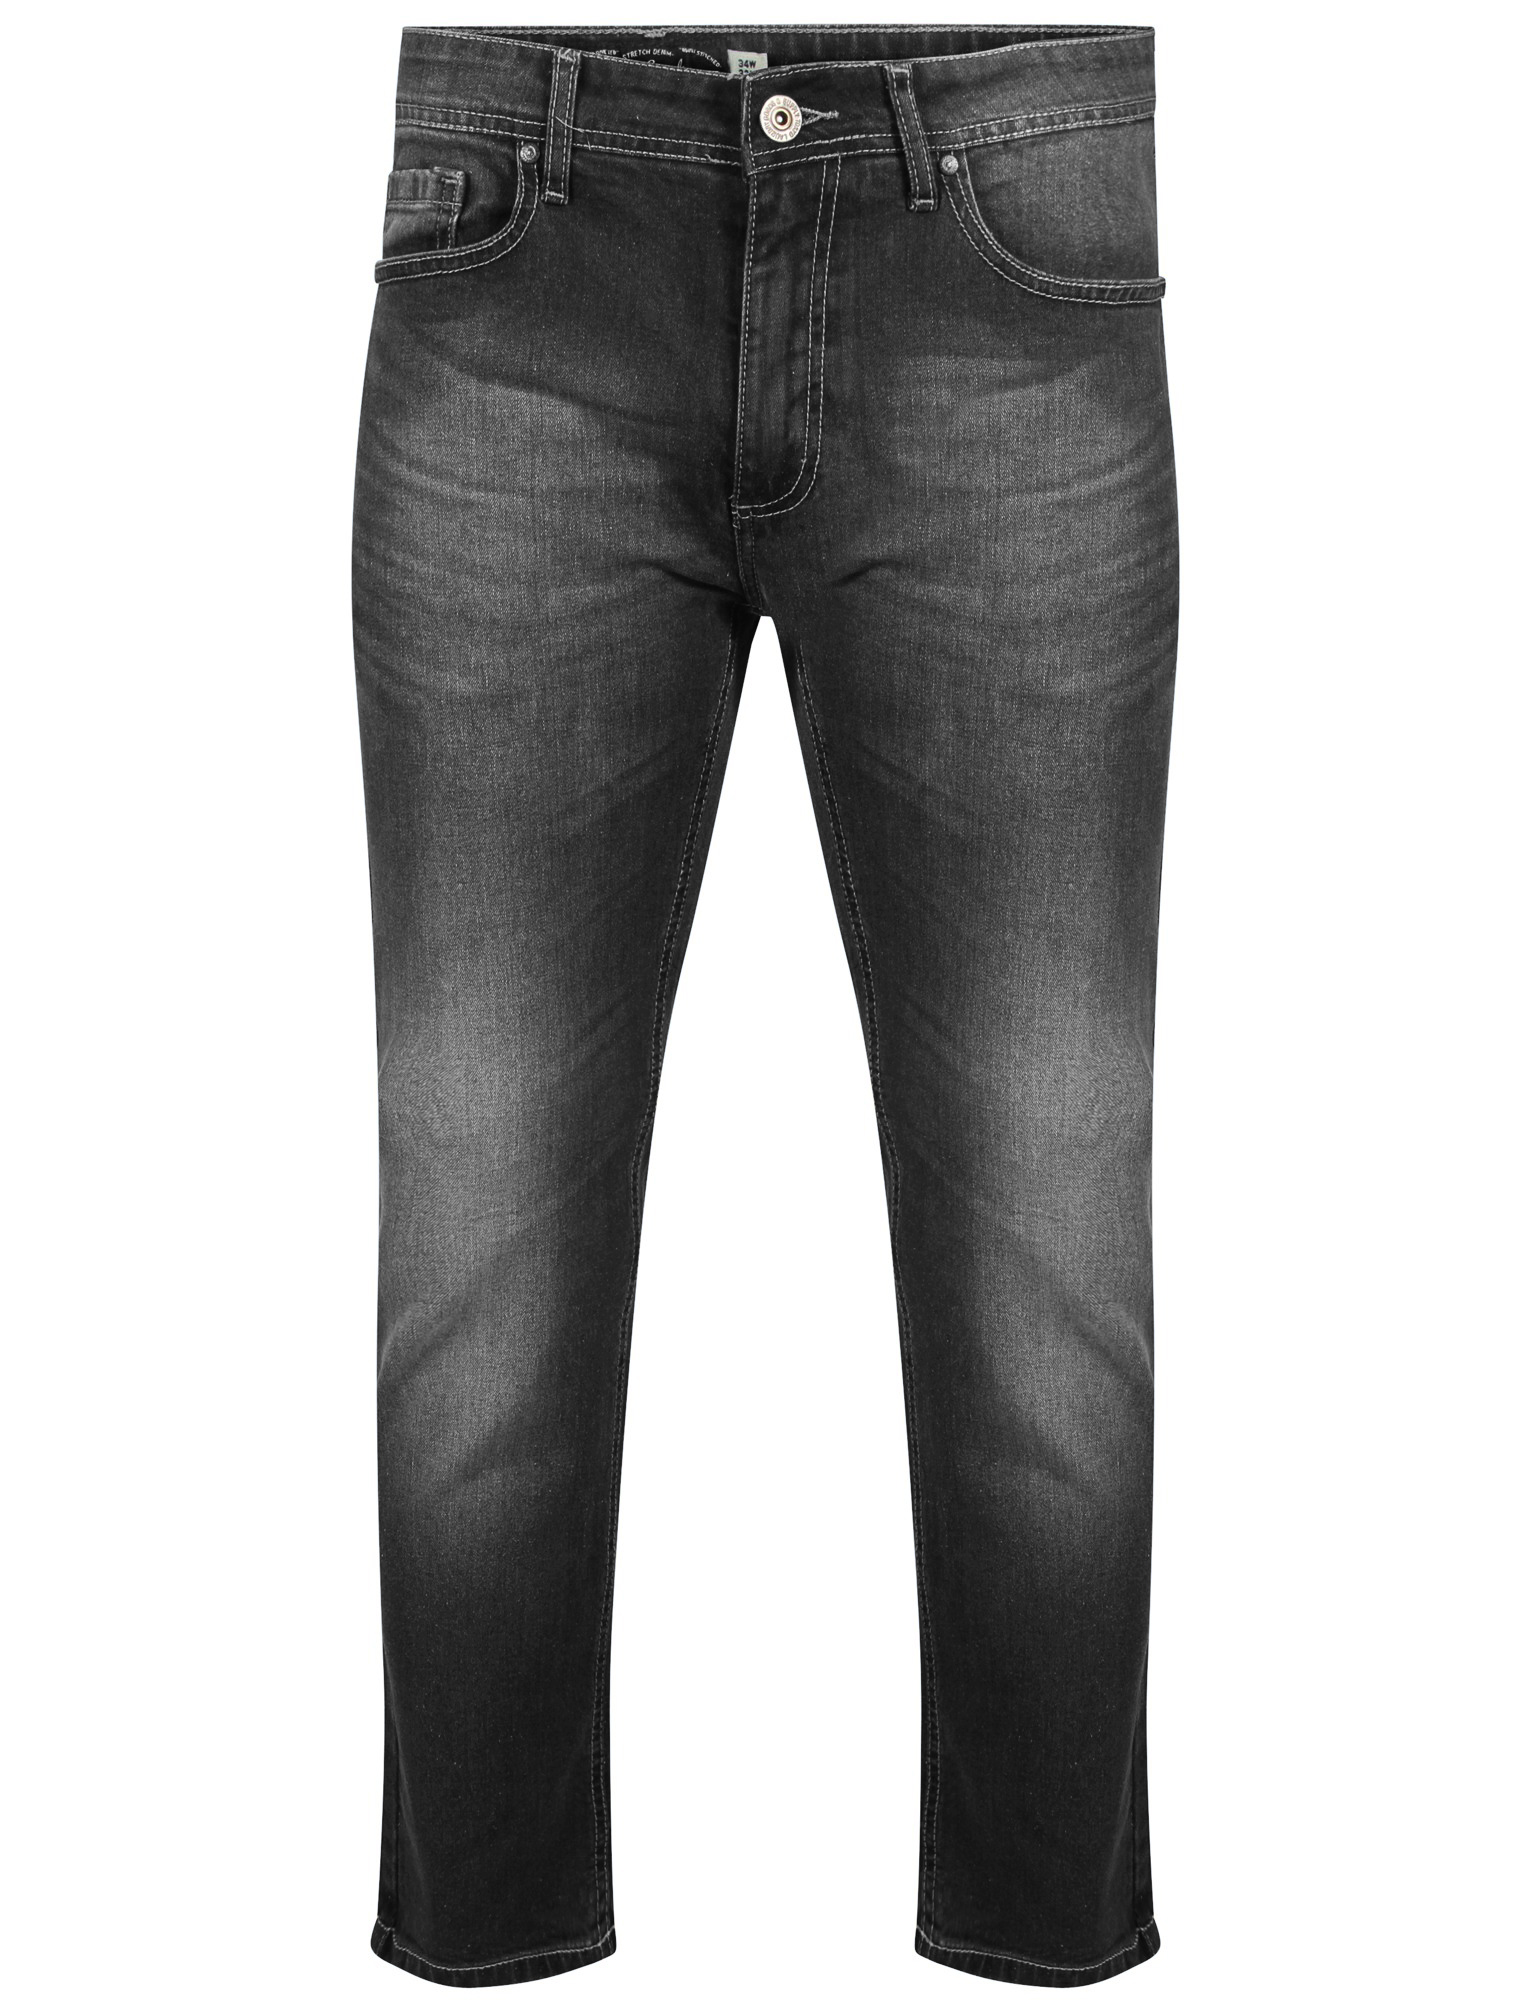 washed jeans mens